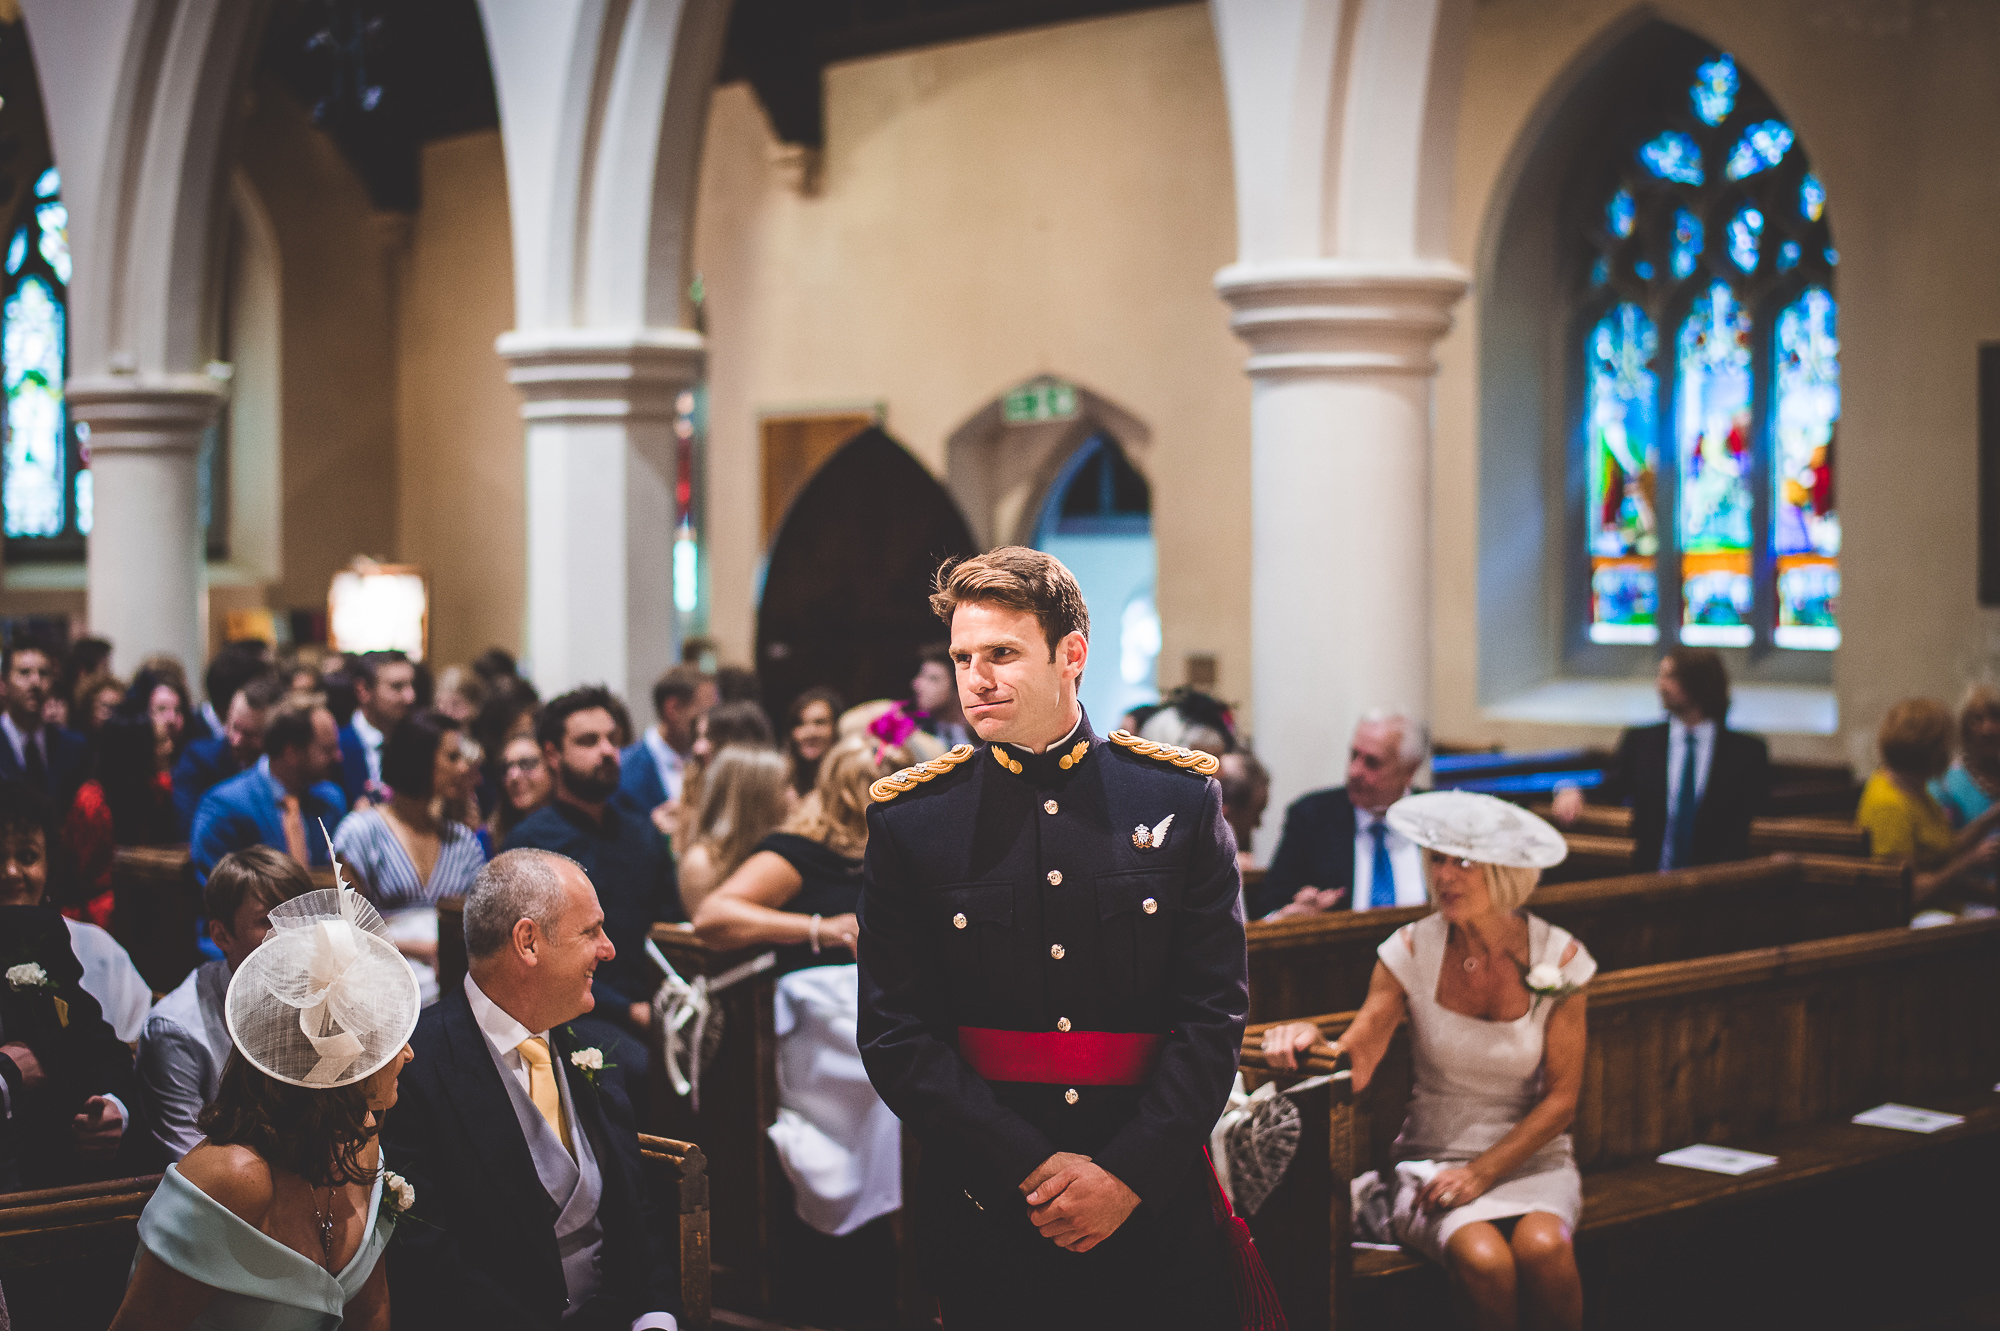 A man in a military uniform standing next to the bride in a wedding photo inside a church.